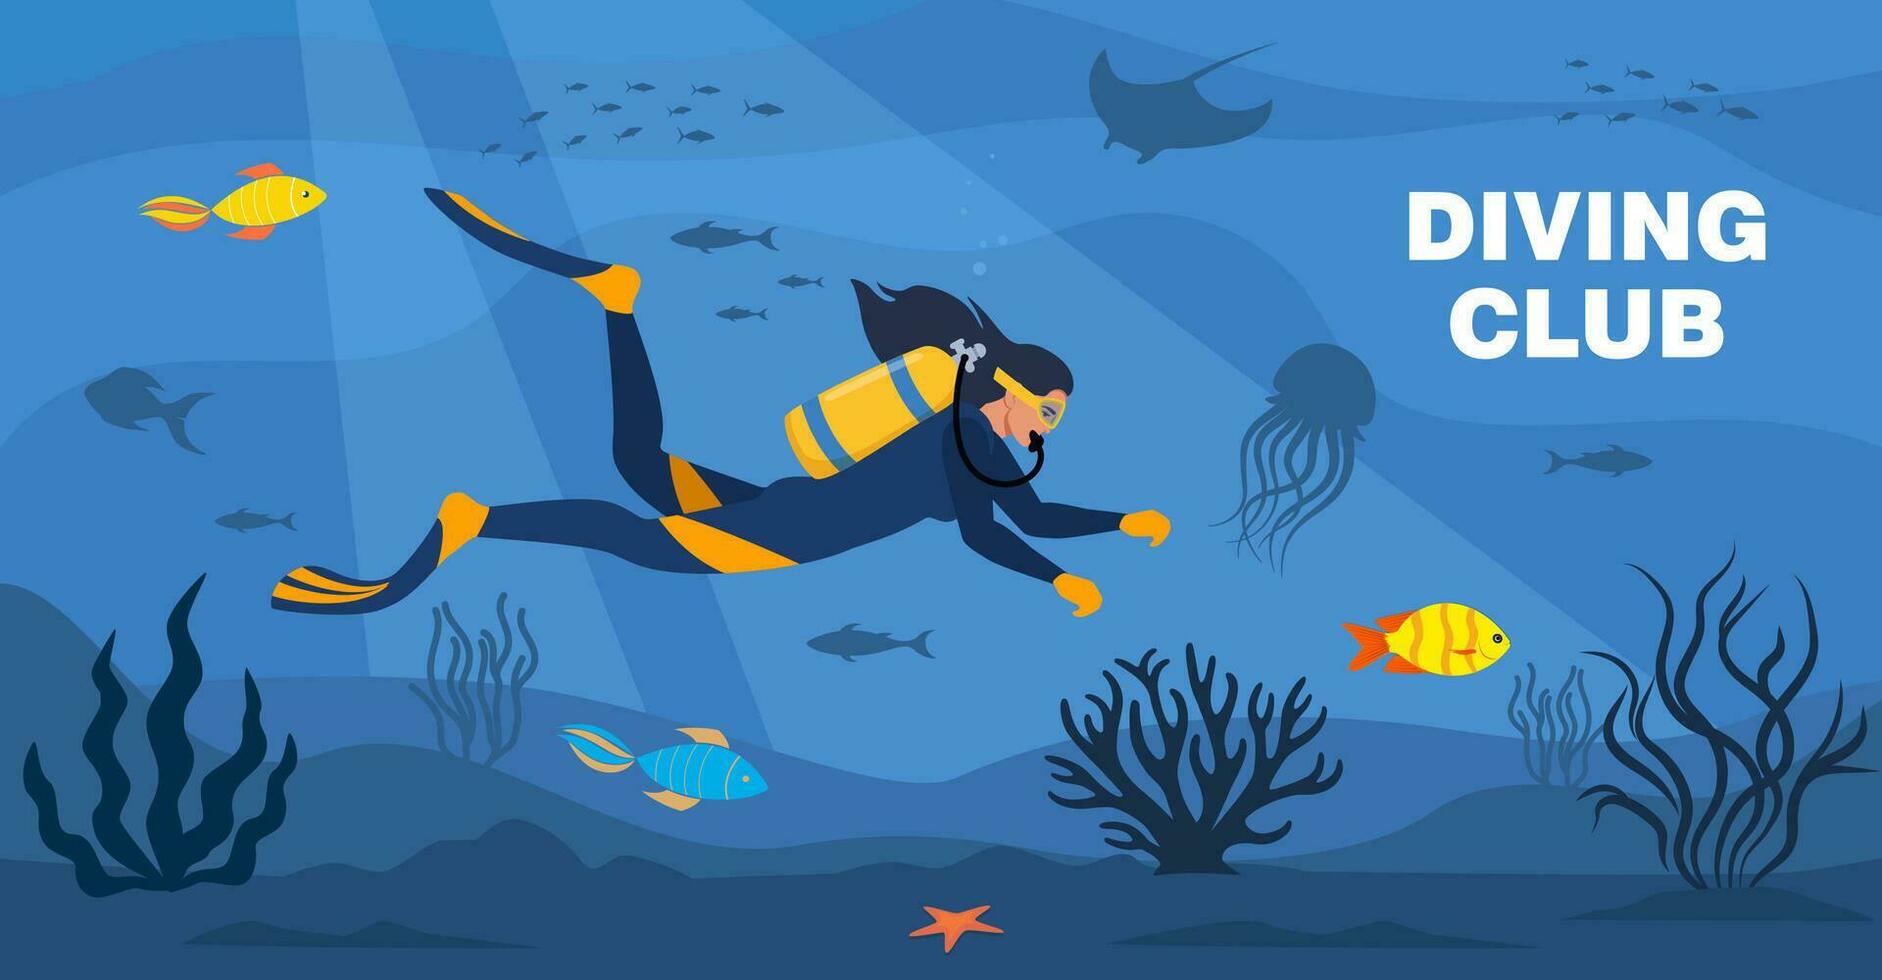 Diving club banner. Diver with diving equipment swims in the sea. Seascape banner with woman underwater. Girl wearing wetsuit with oxygen tank and fins. Underwater world. Vector illustration.